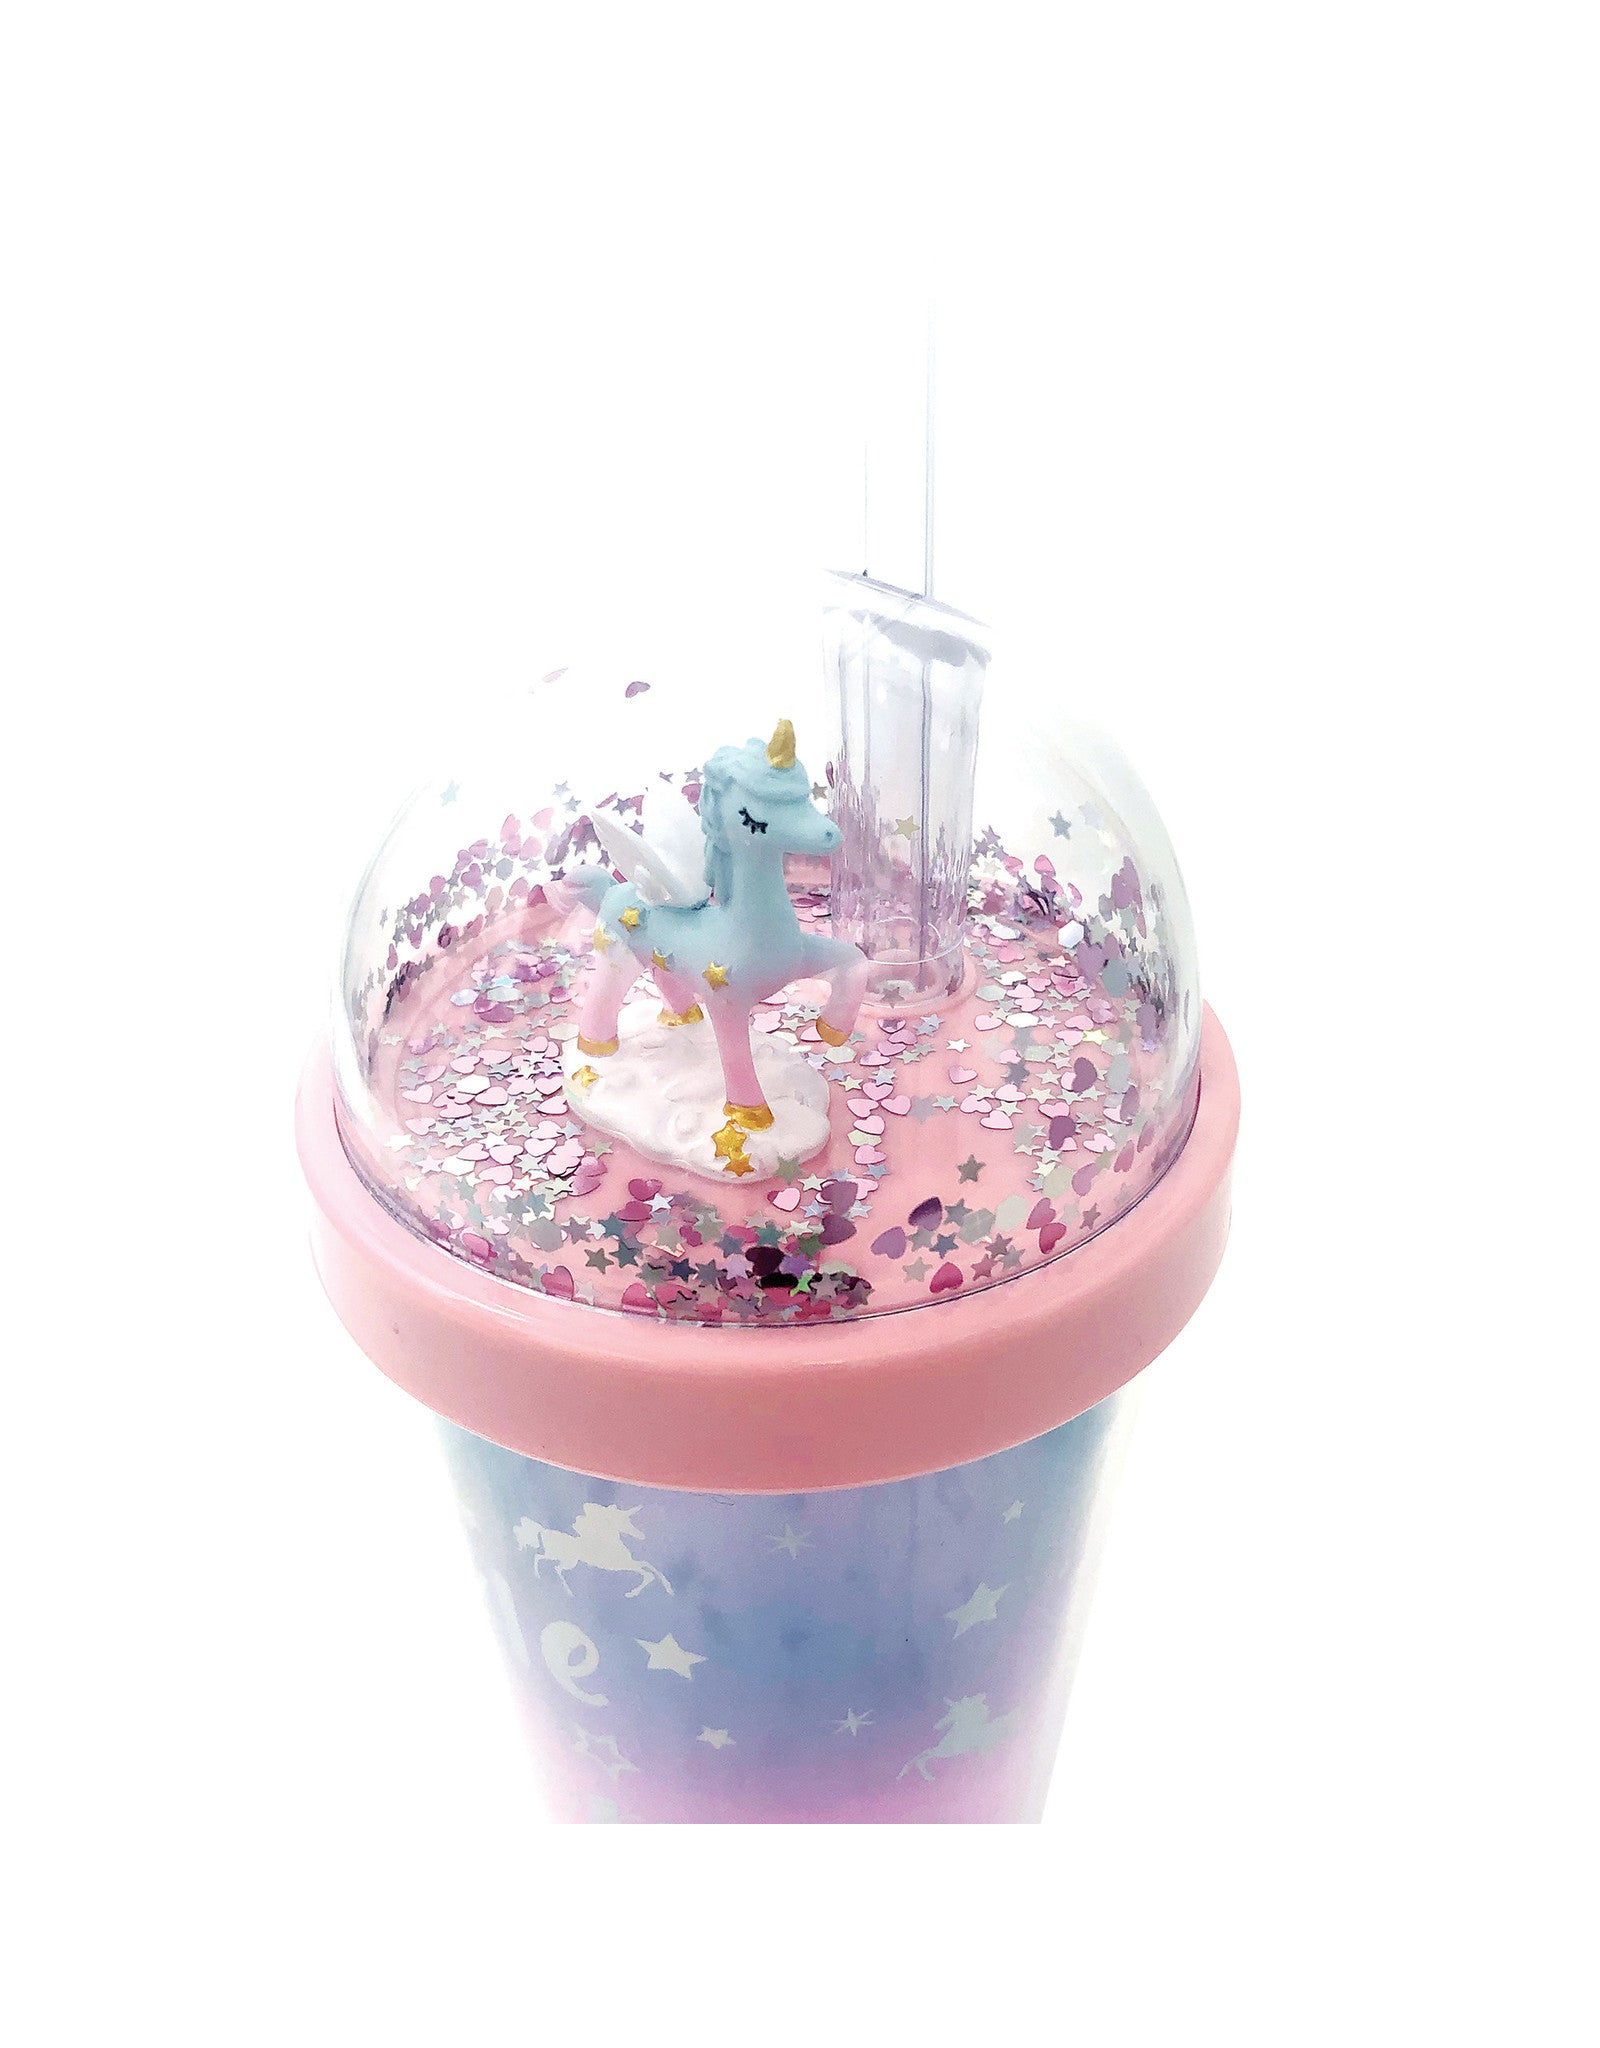 Unicorn Tumbler With Dome Lid And Straw, Double Walled Plastic